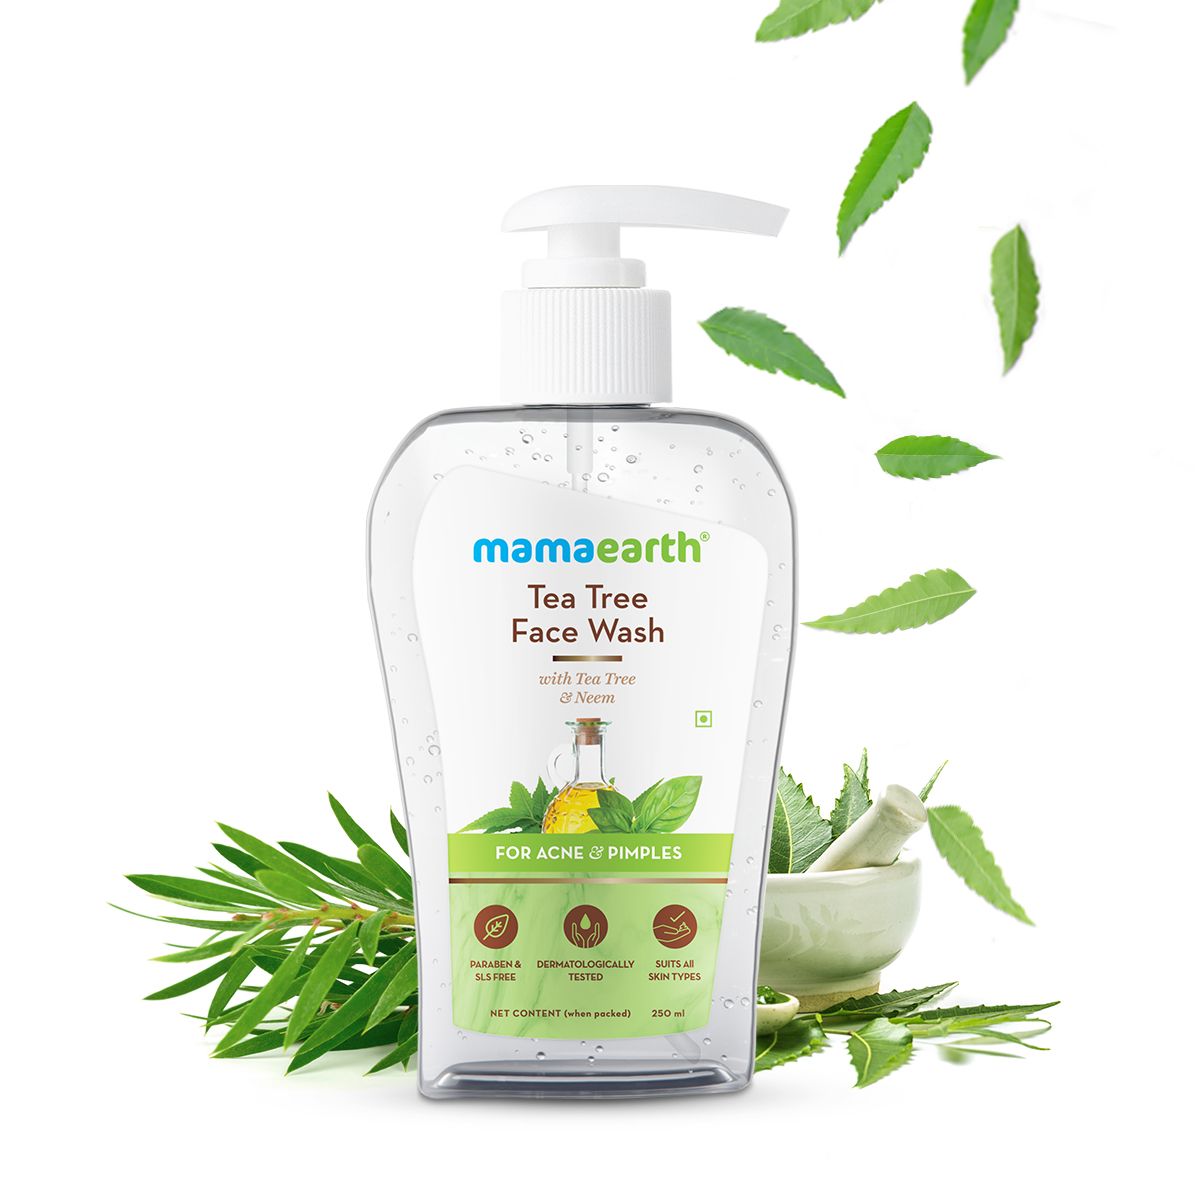 Why Is Mamaearth Tea Tree Face Wash Better Than Other Options Available in the Market